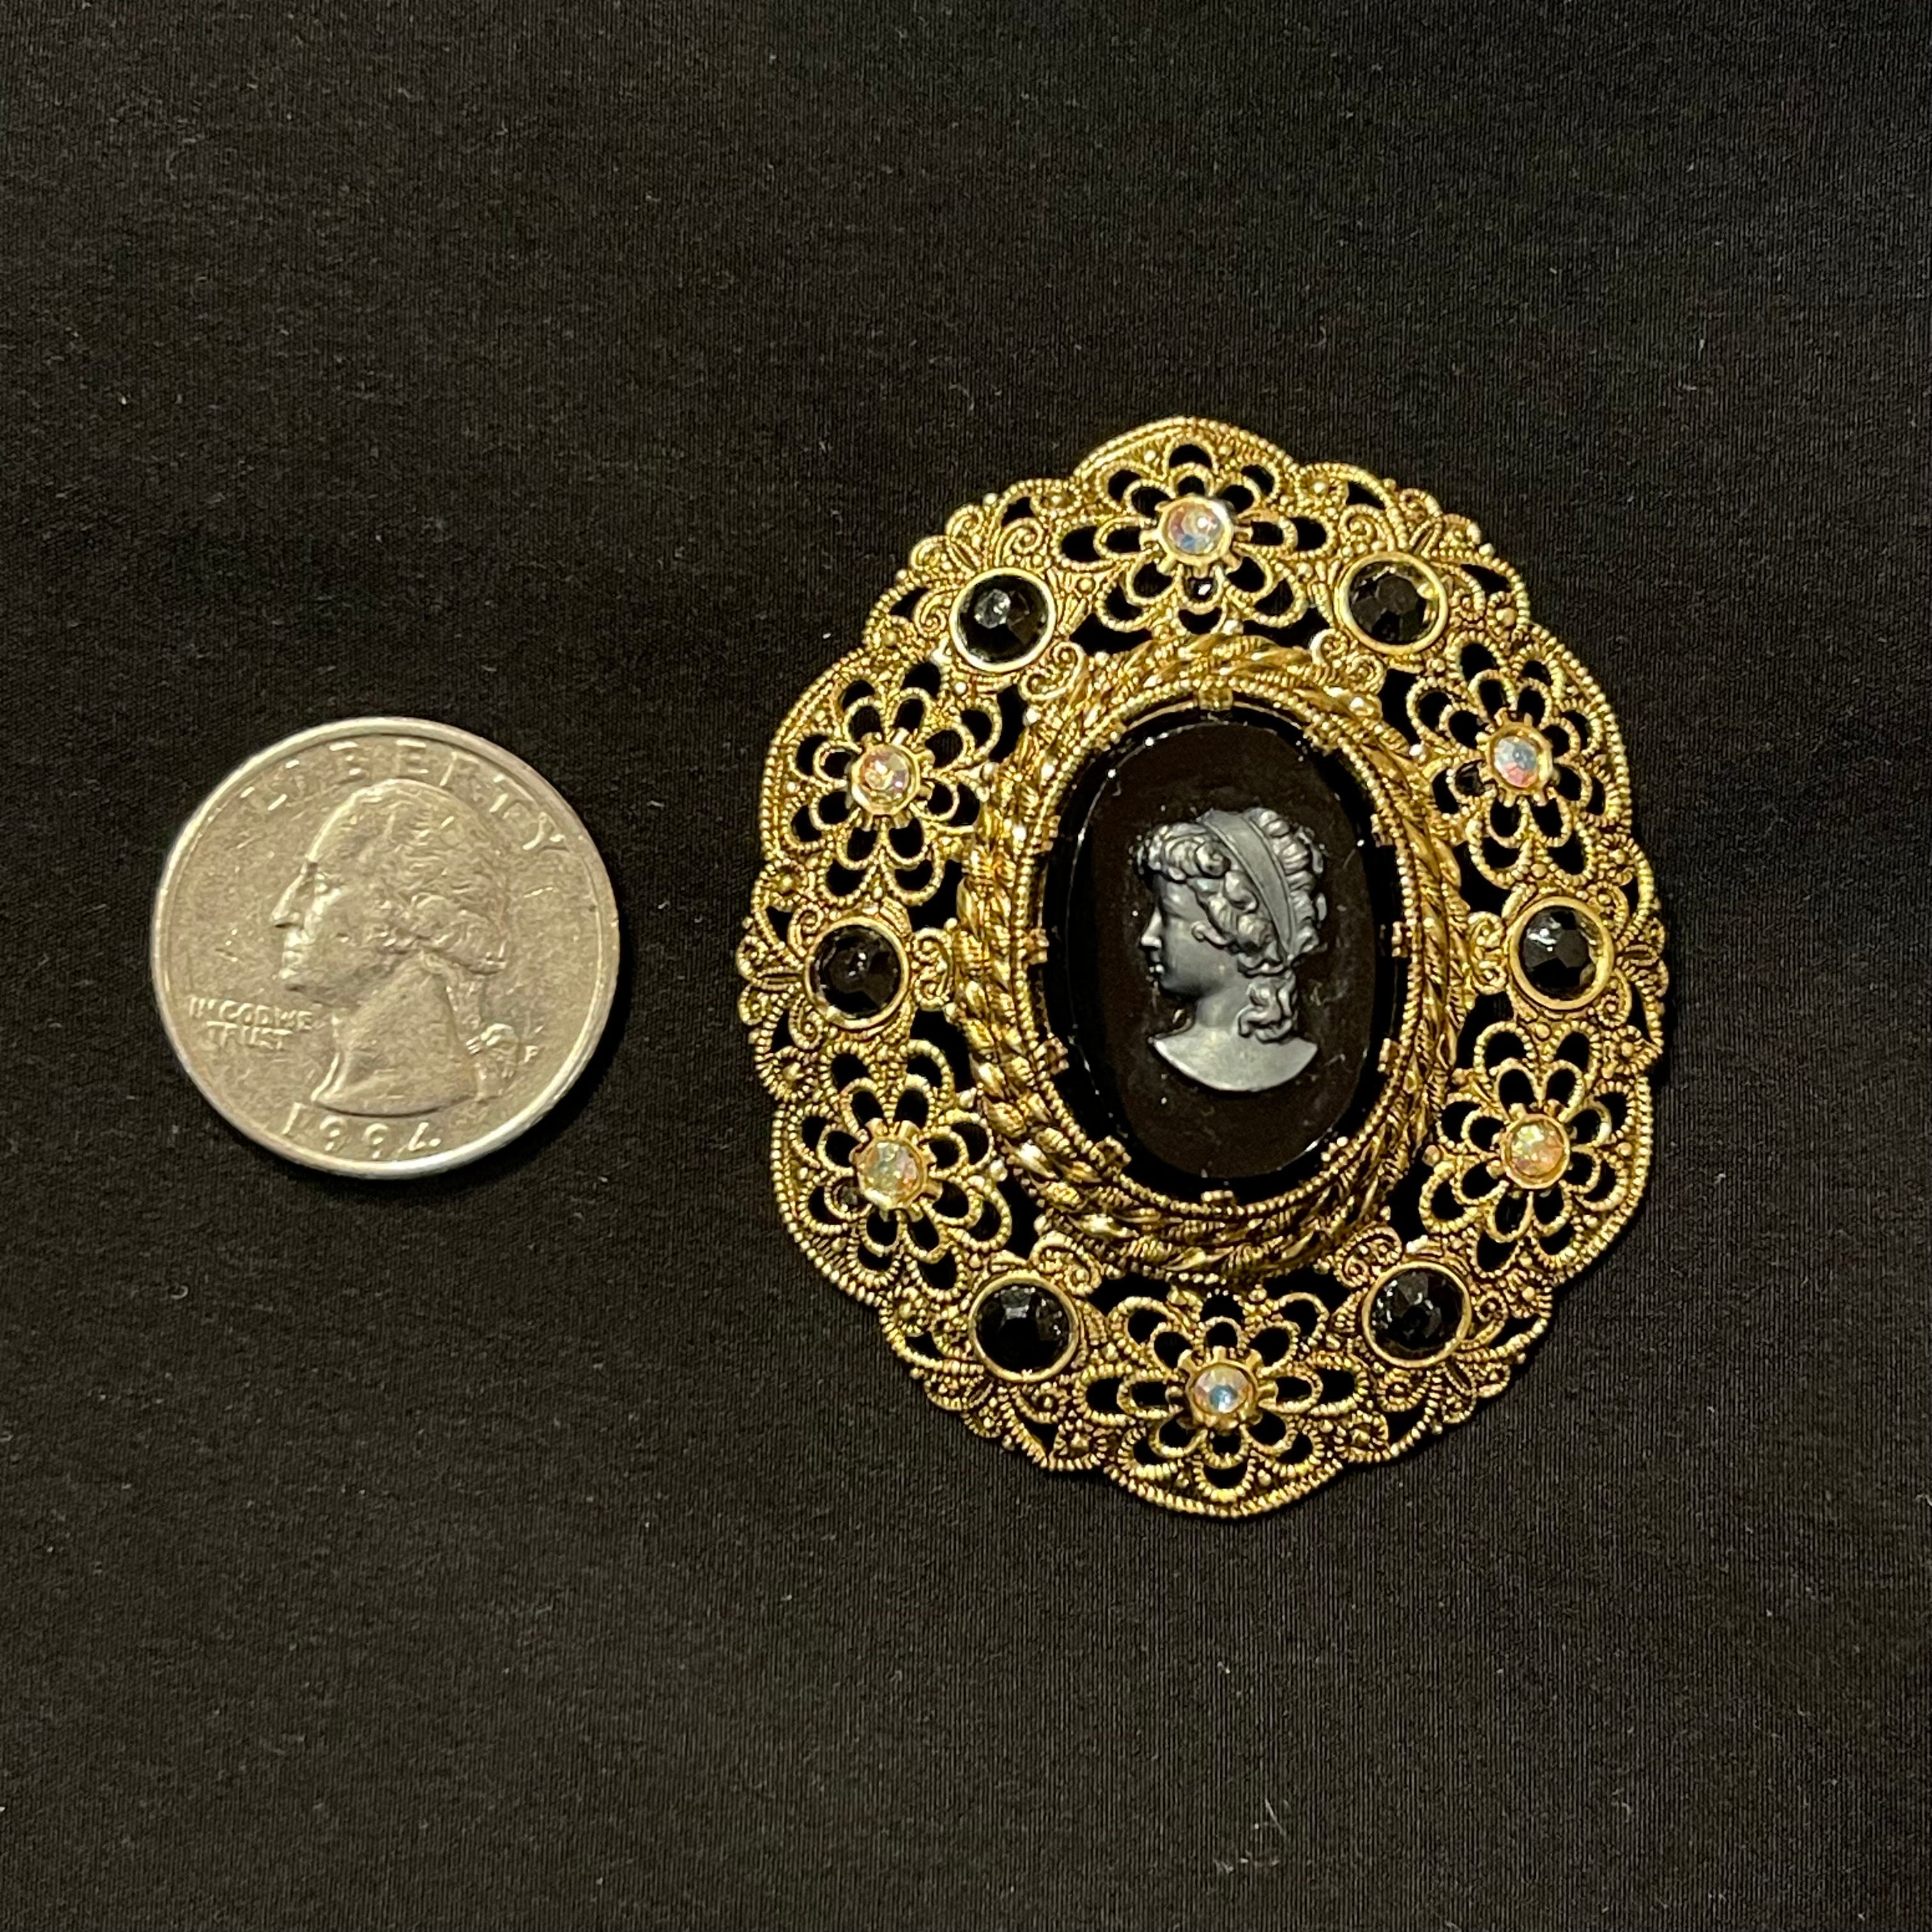 Ornate Vintage Gold and Black Oval Cameo Brooch